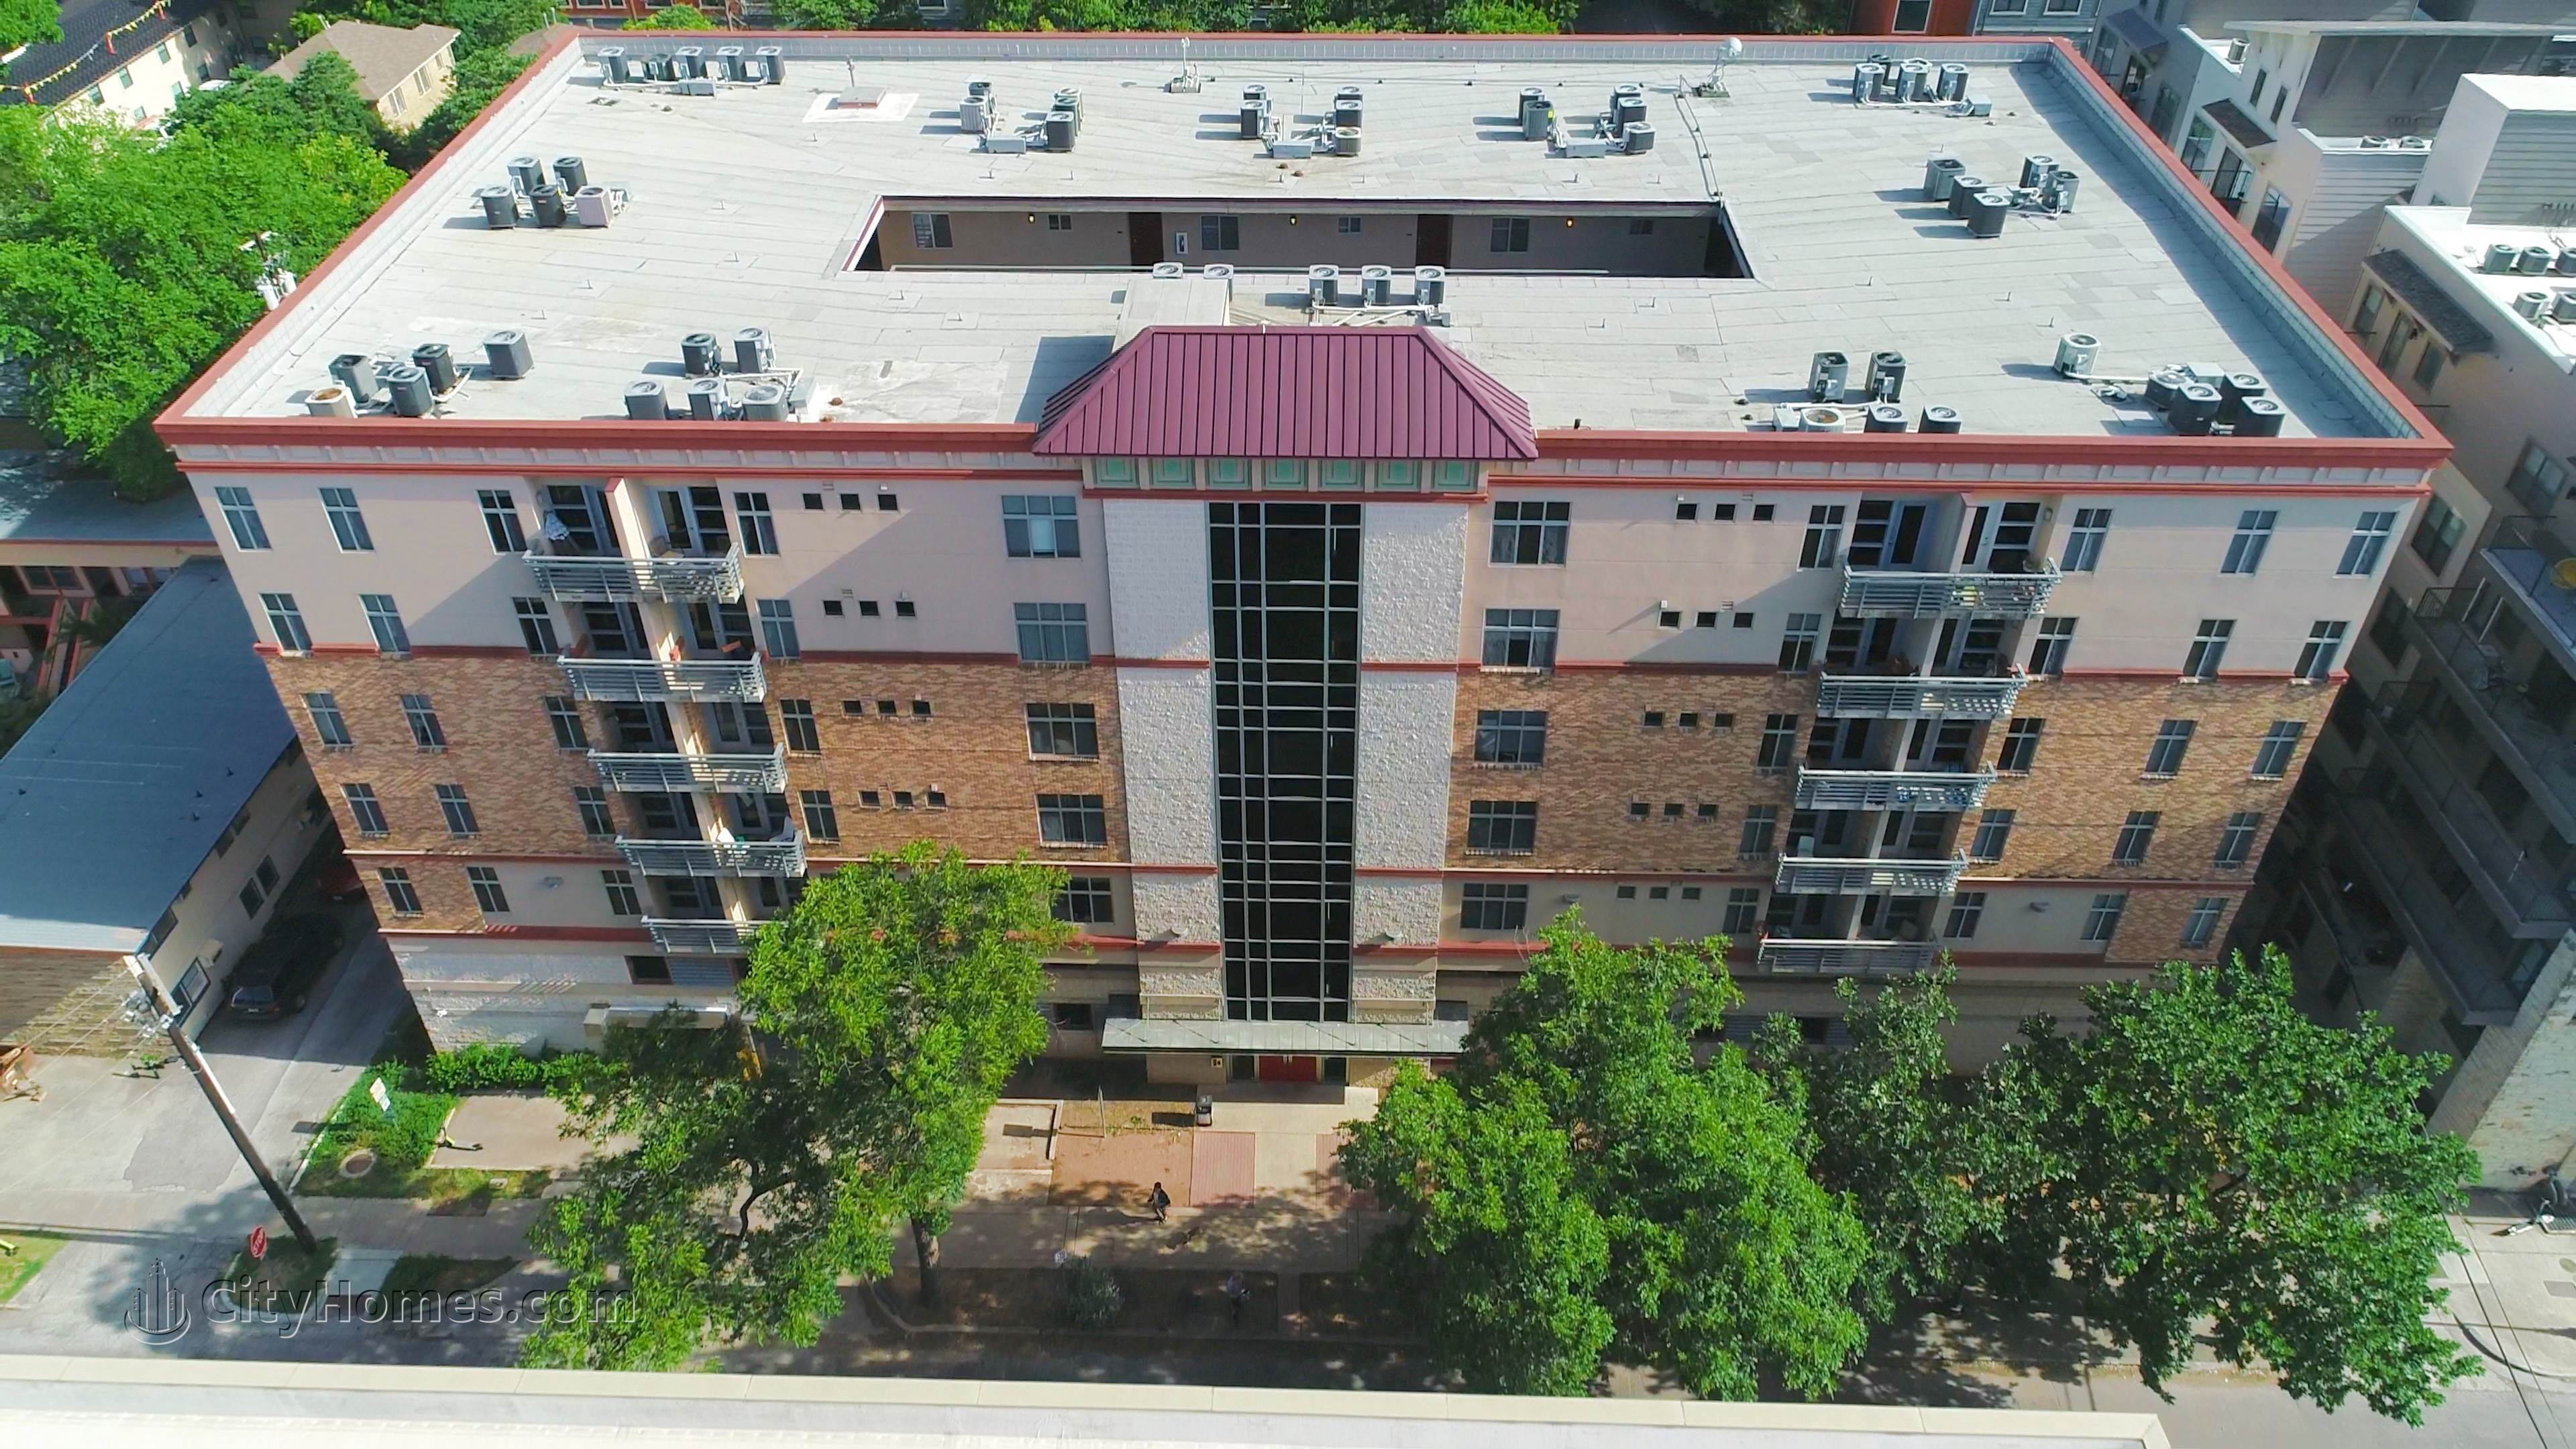 Piazza Navona Condos building at 711 W 26th St, West Campus, Austin, TX 78705